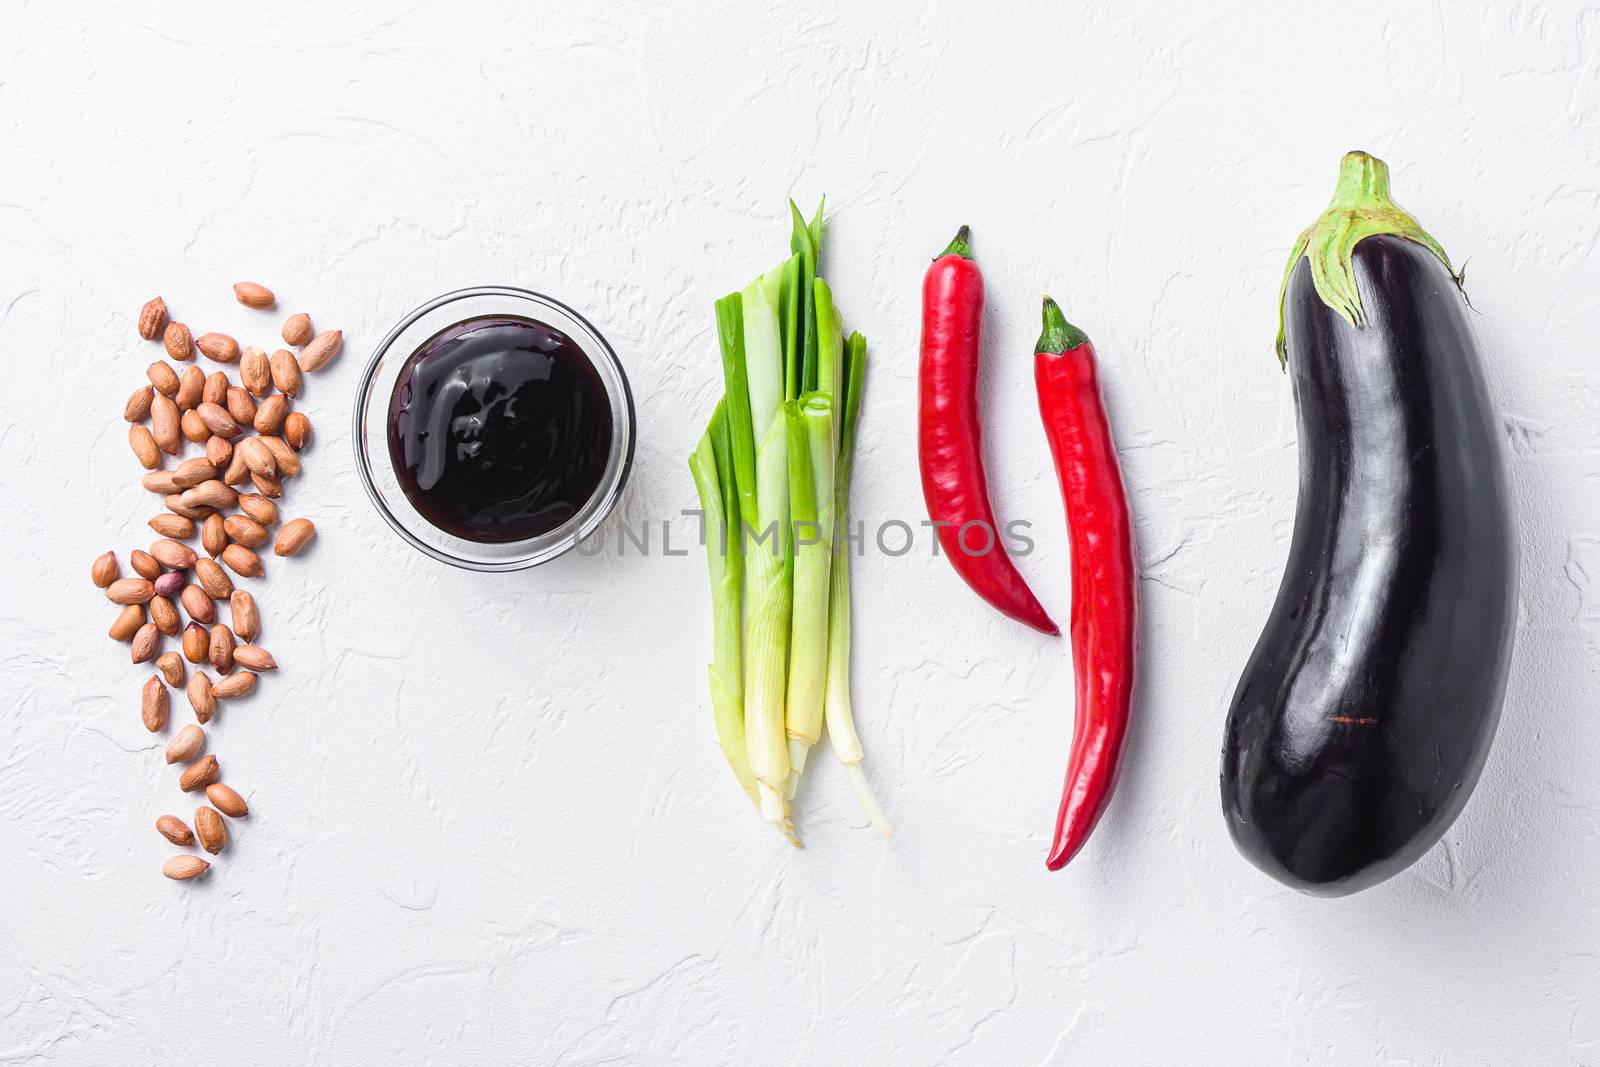 Ripe aubergine ingredients, for cooking or grill chili pepper, eggplant, sauce, nuts on white background top view